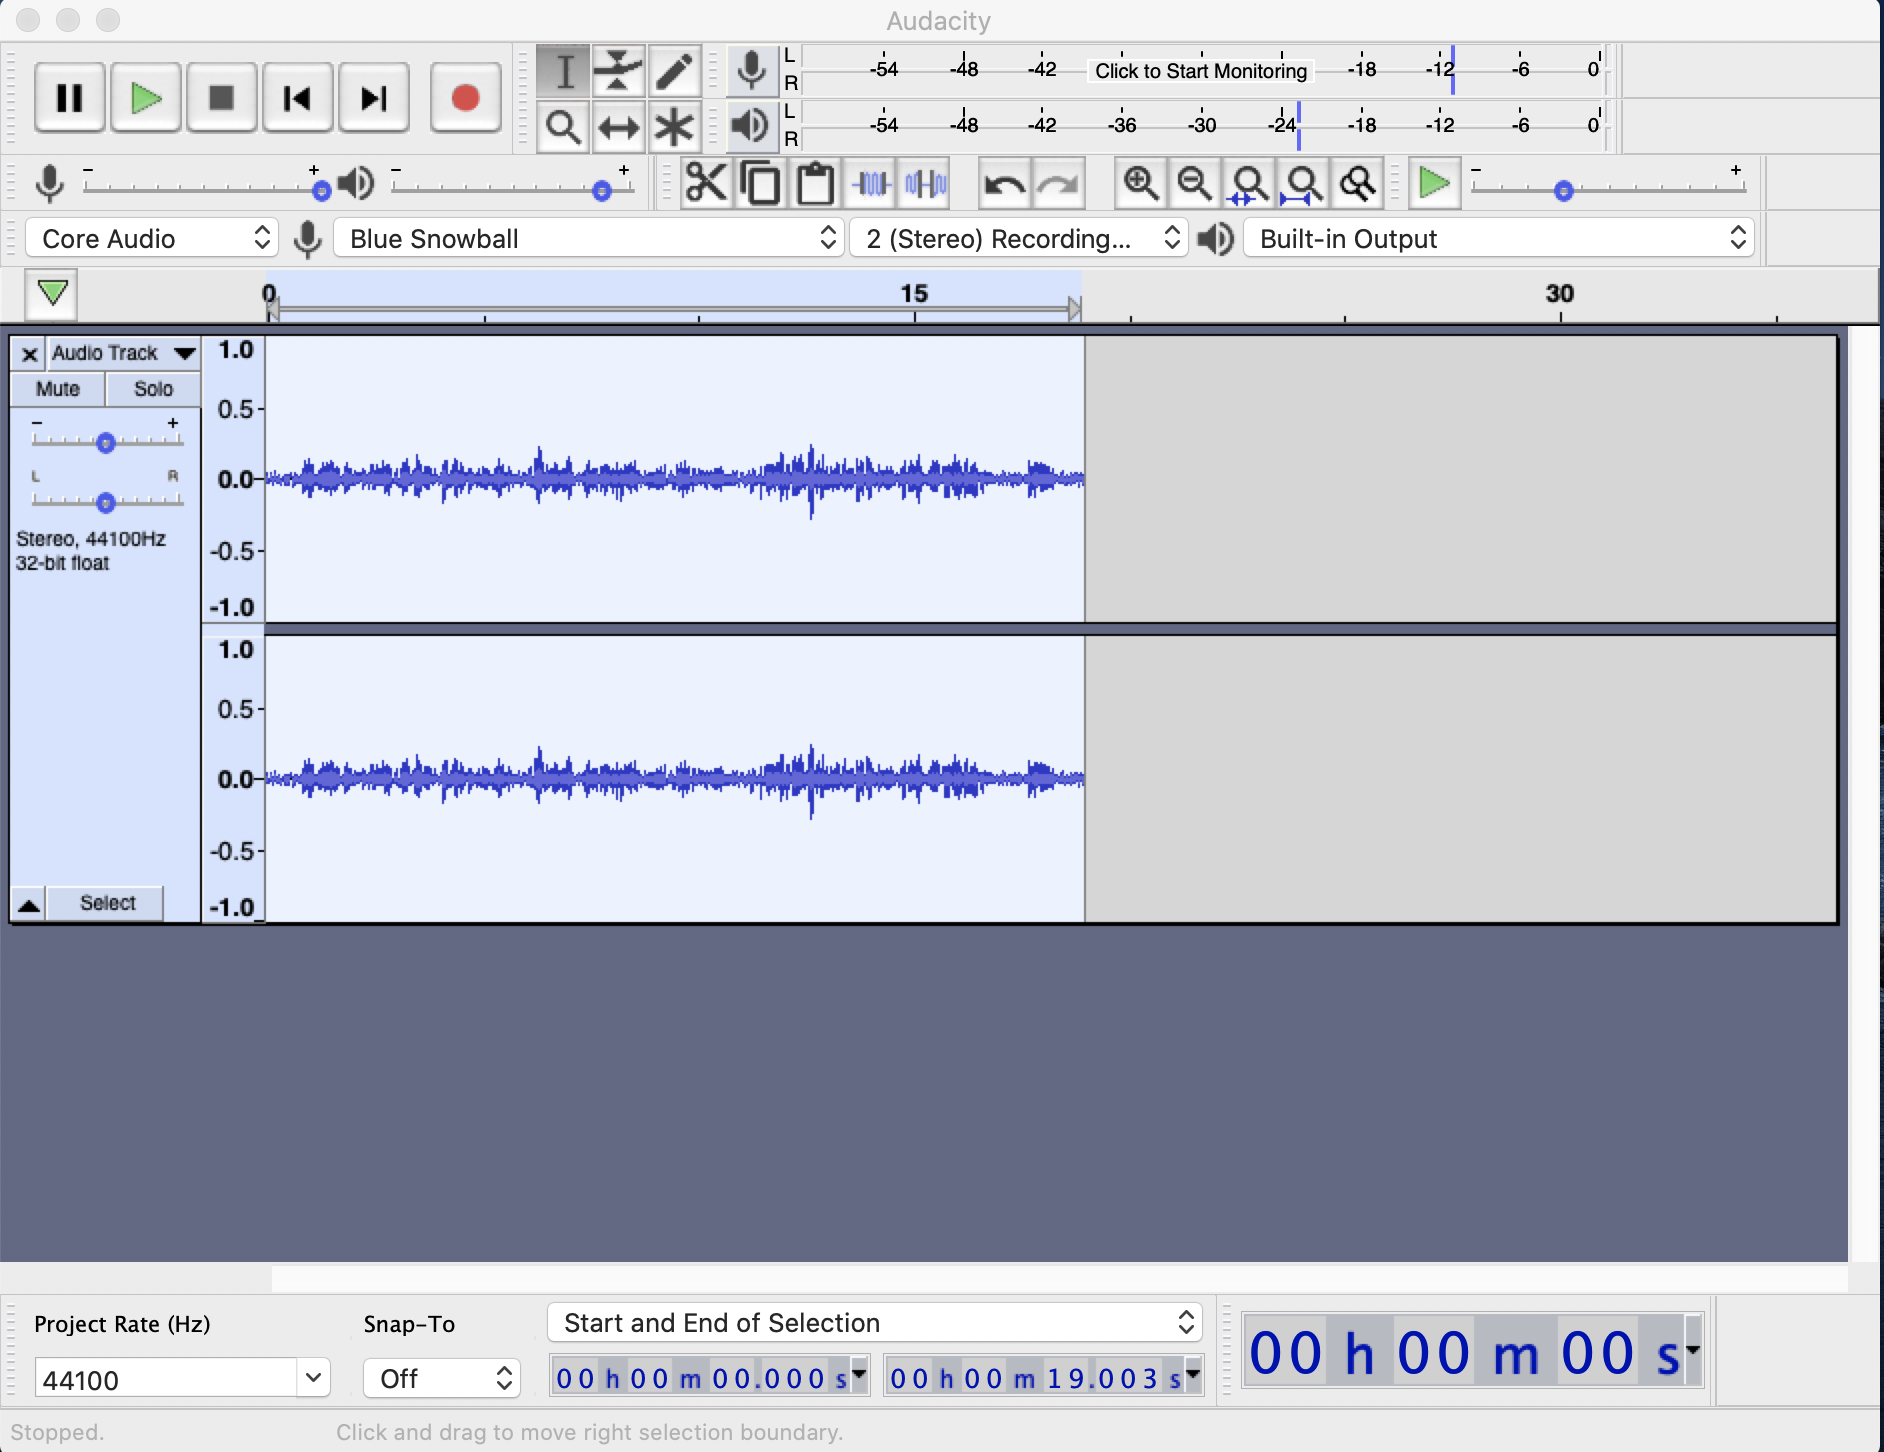 Audacity window with entire audio file selected